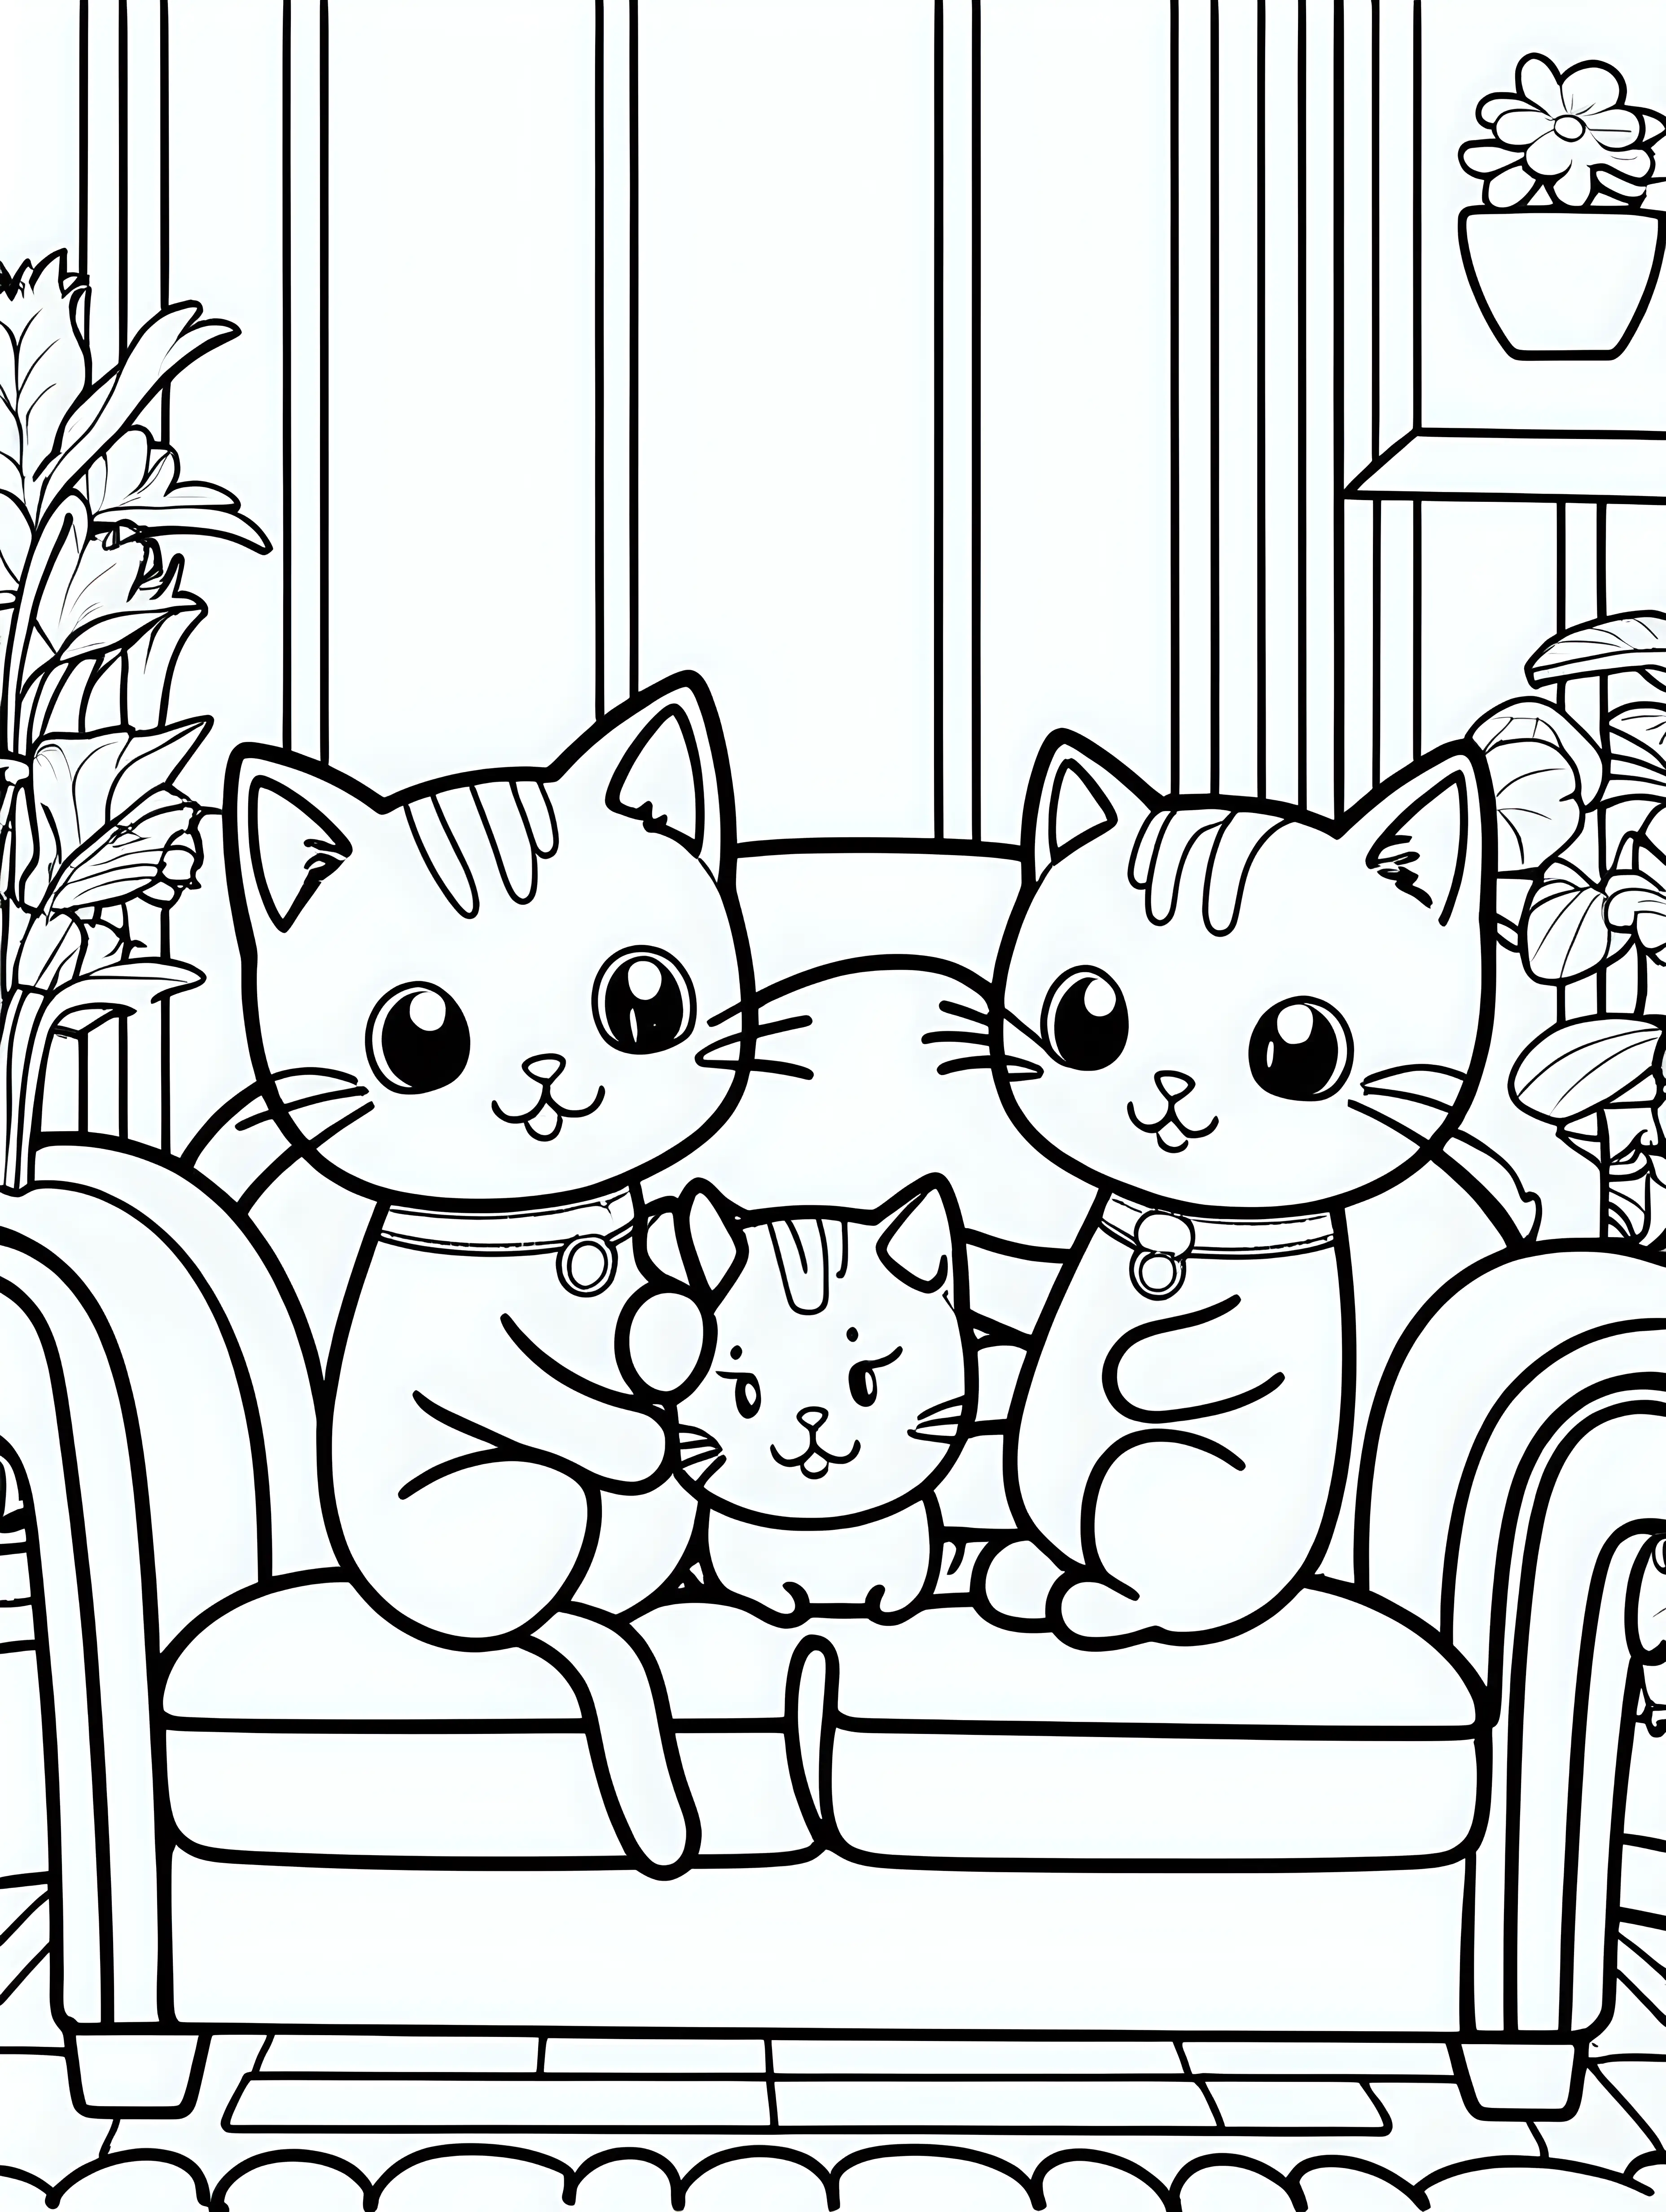 black and white coloring page for children with two kawaii cats playing together on a couch, black lines white background